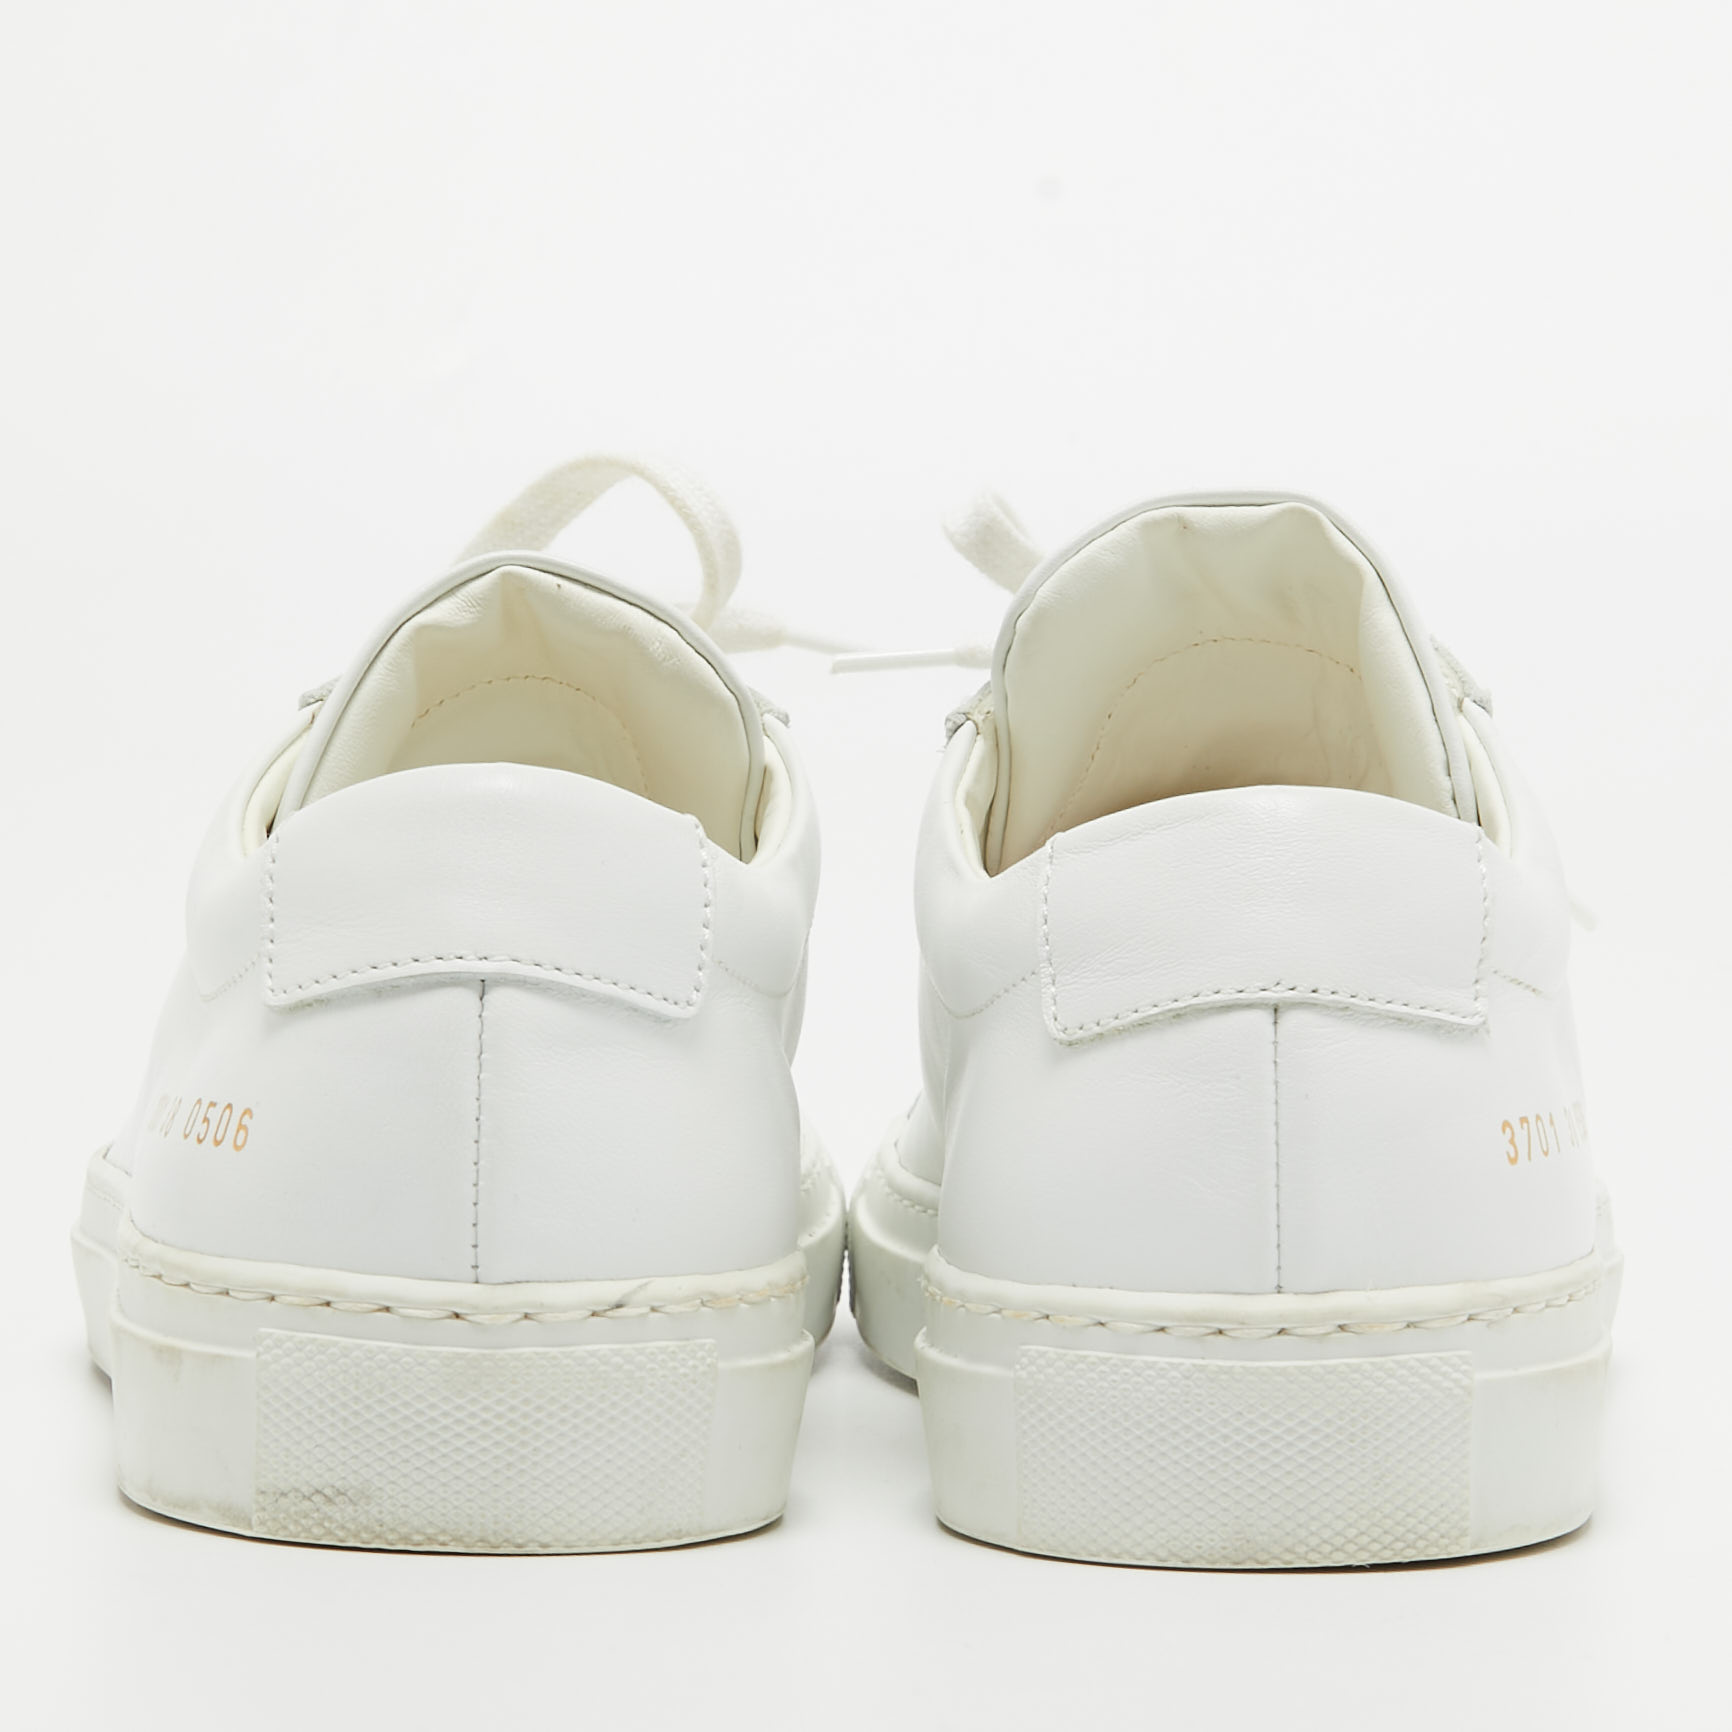 Common Projects White Leather Achilles Sneakers Size 38